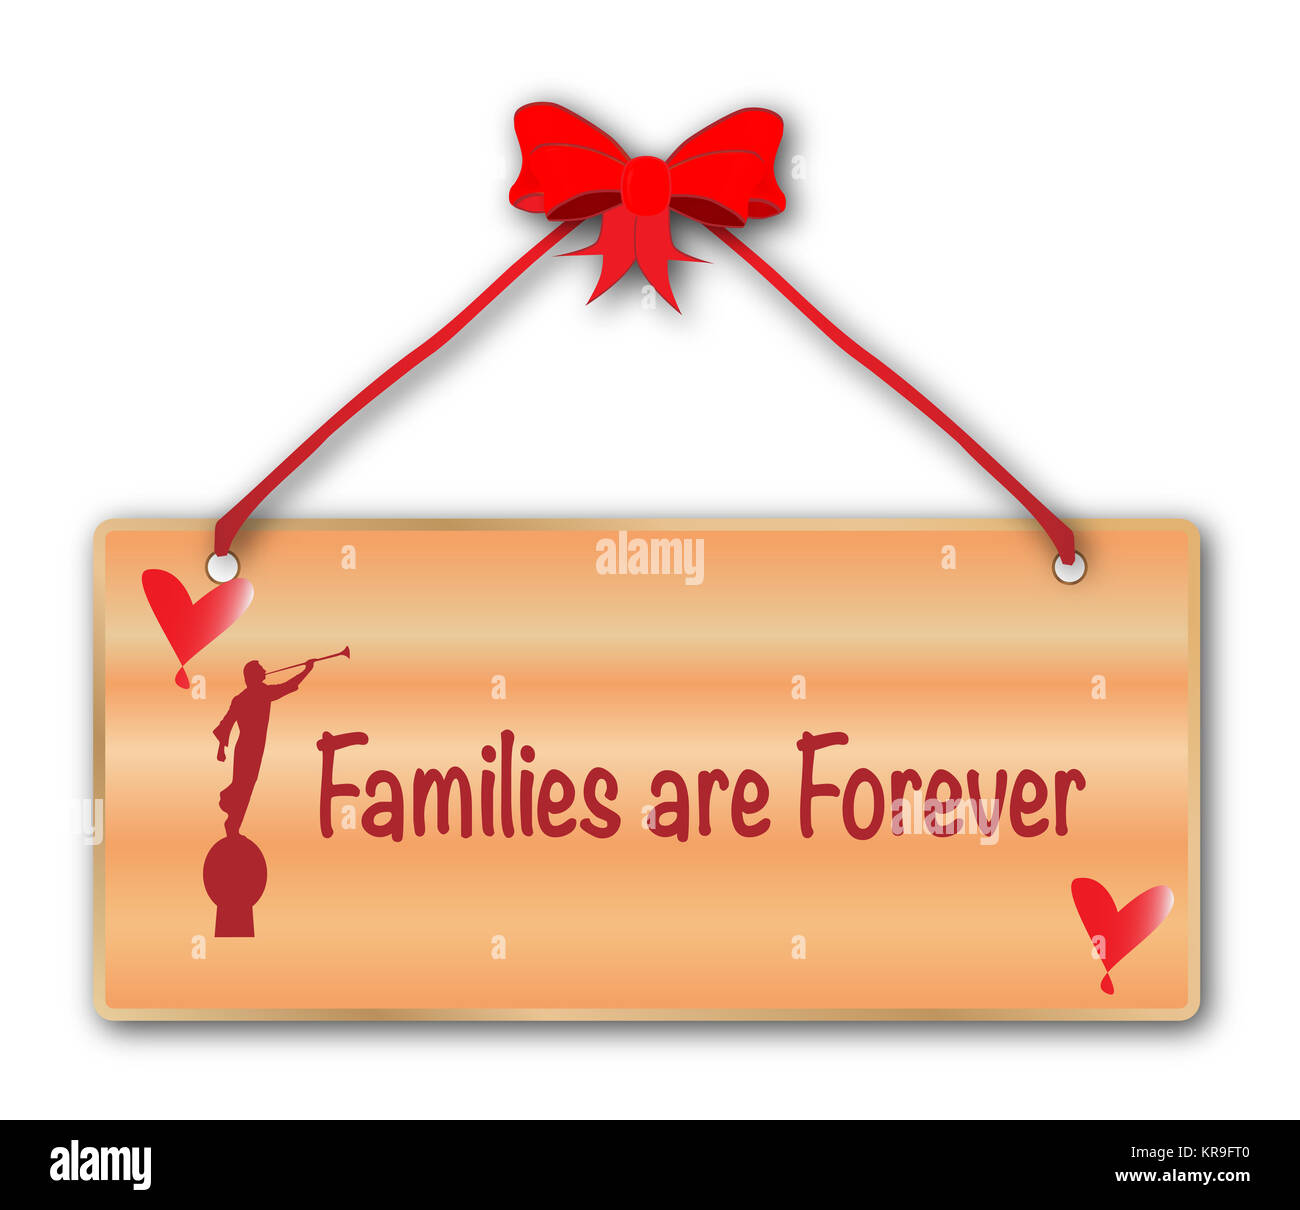 Families Are Forever Sign Stock Photo